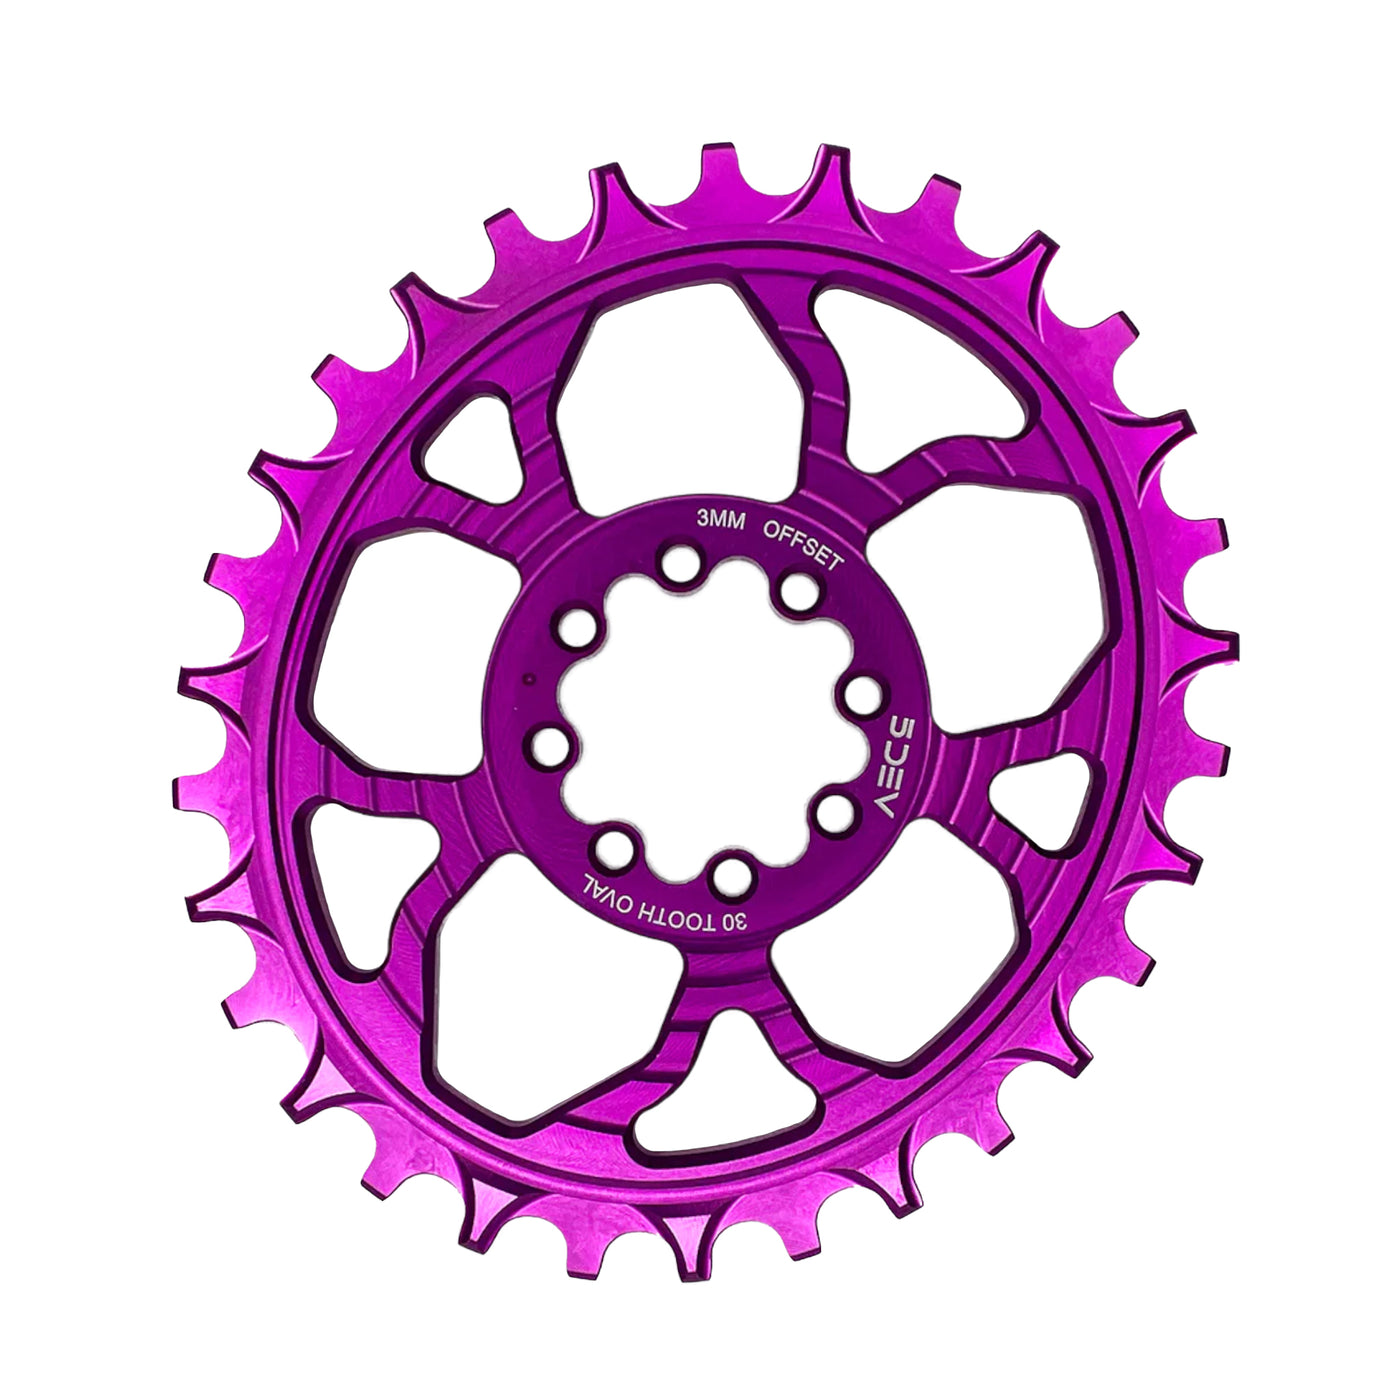 8-Bolt Oval Chainring